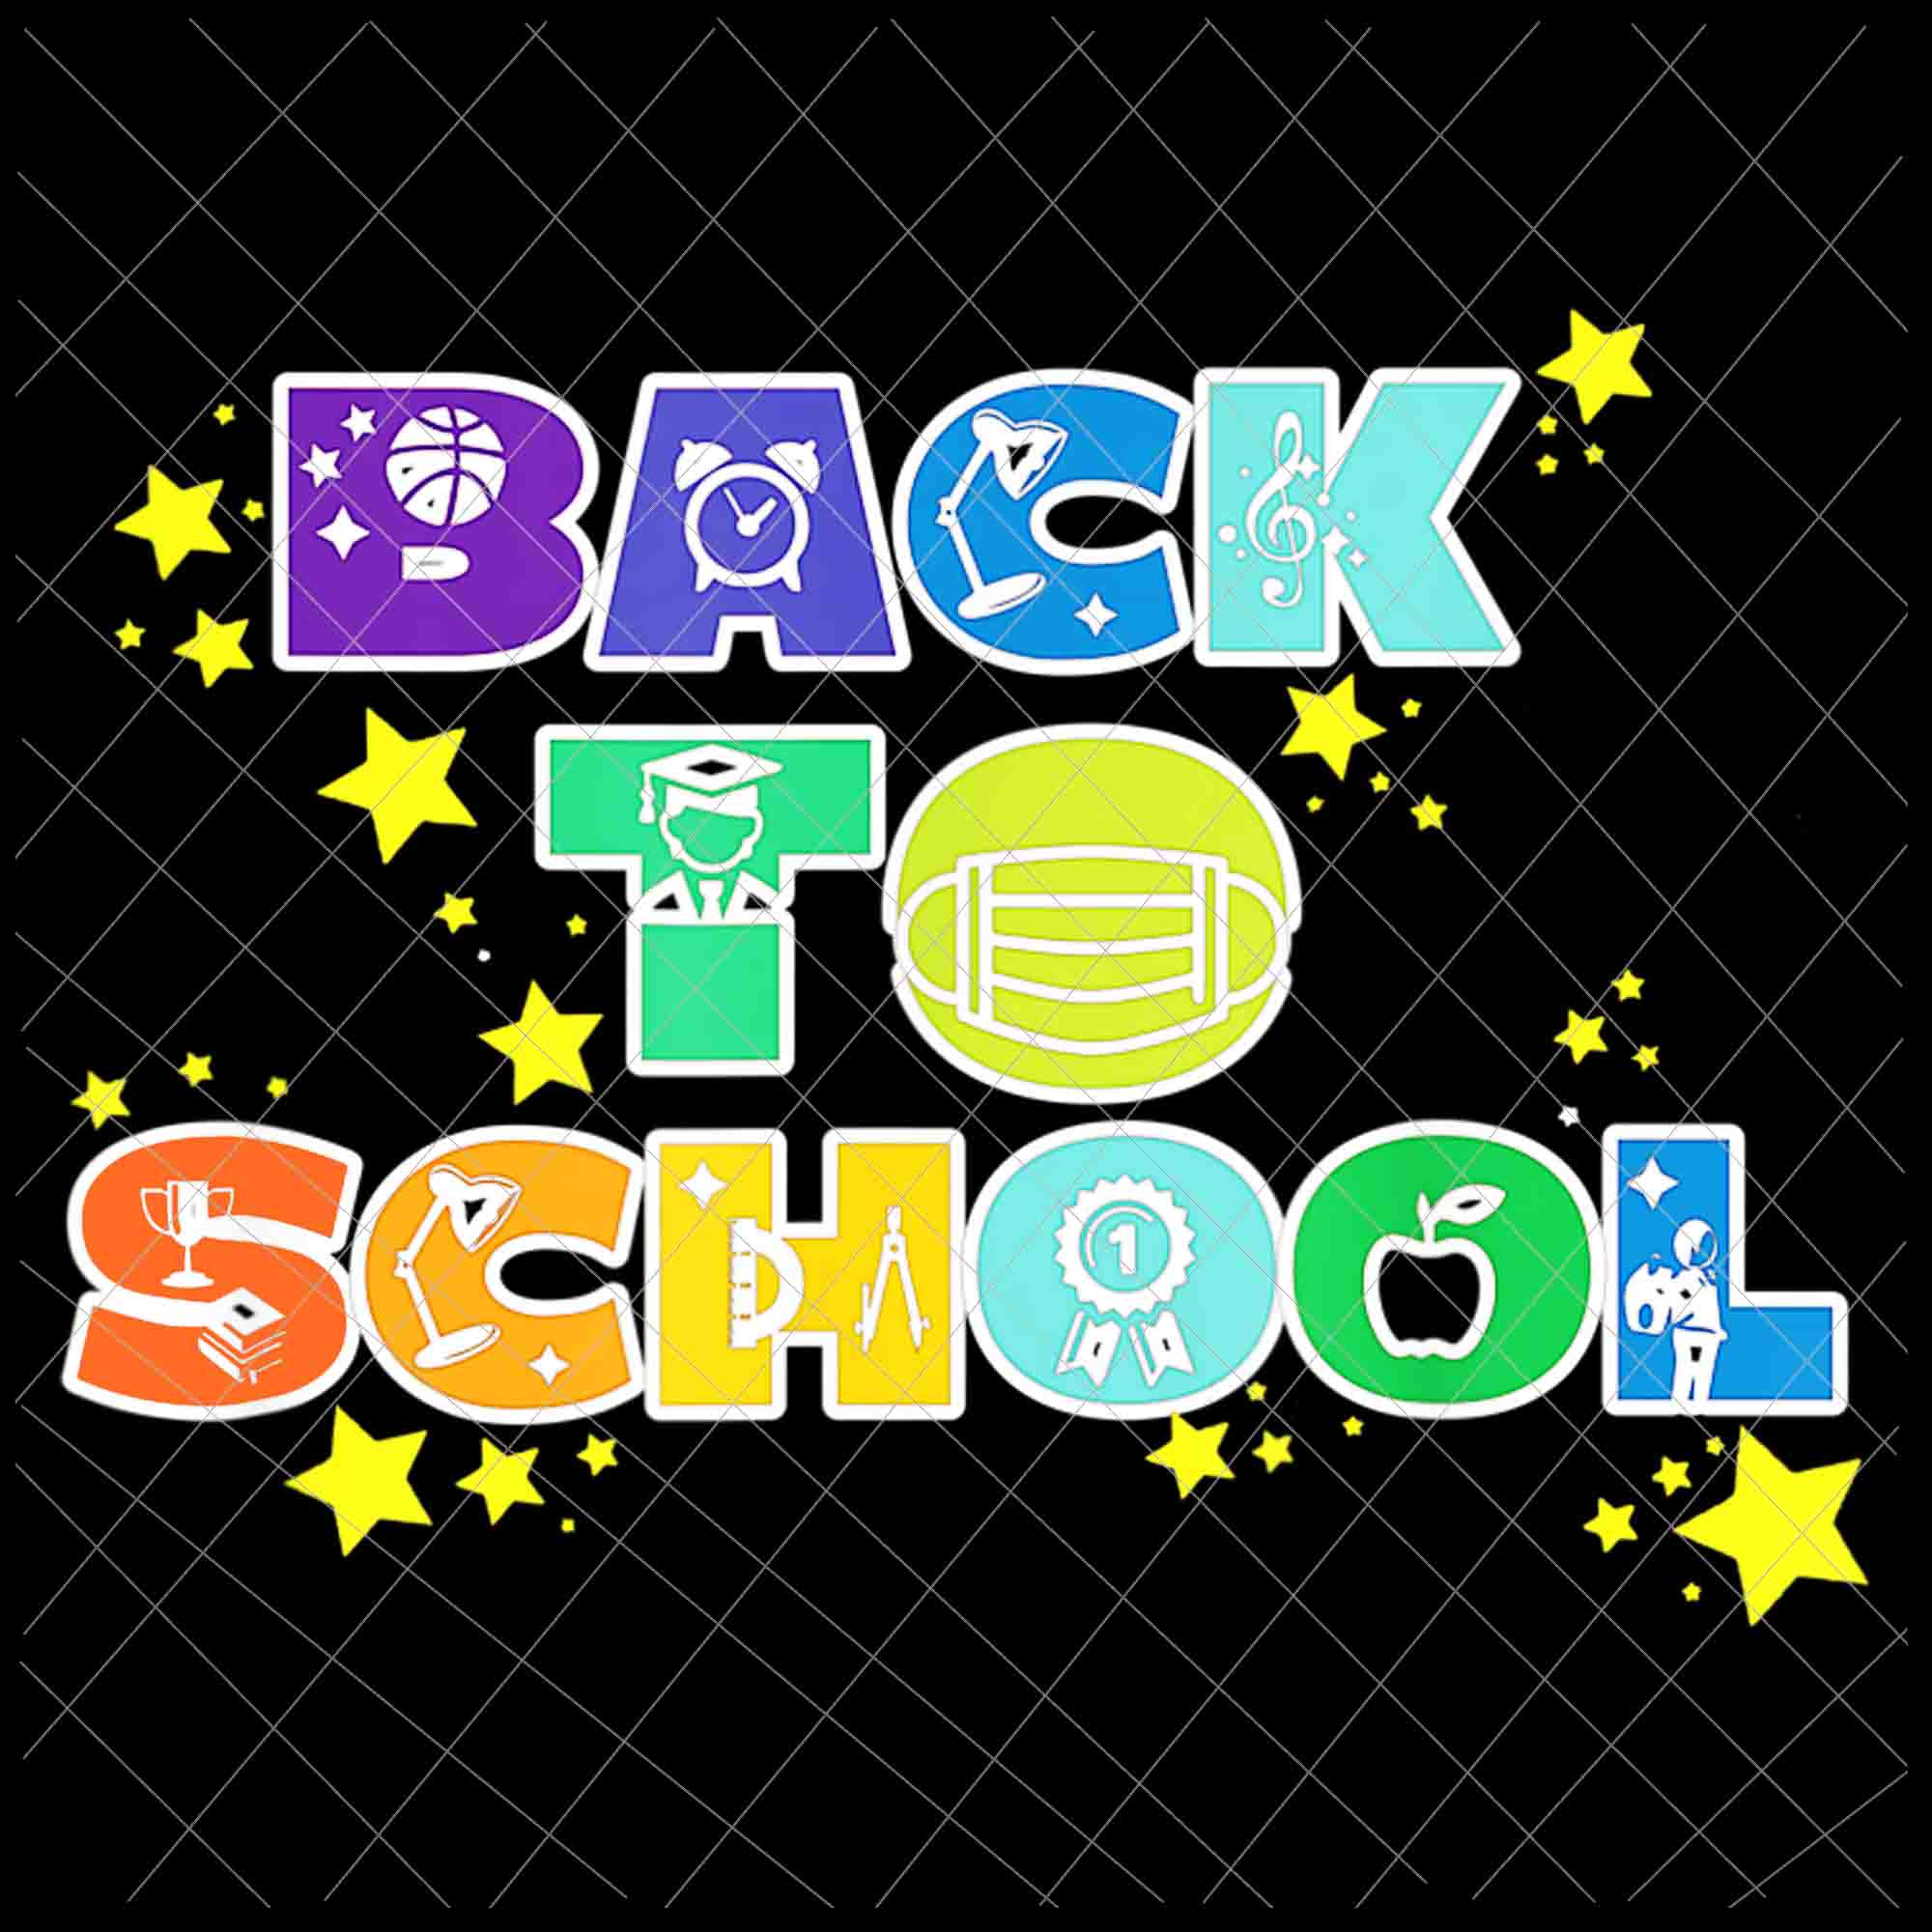 Back to School Png, Teachers and Students funny Back to School Png Design